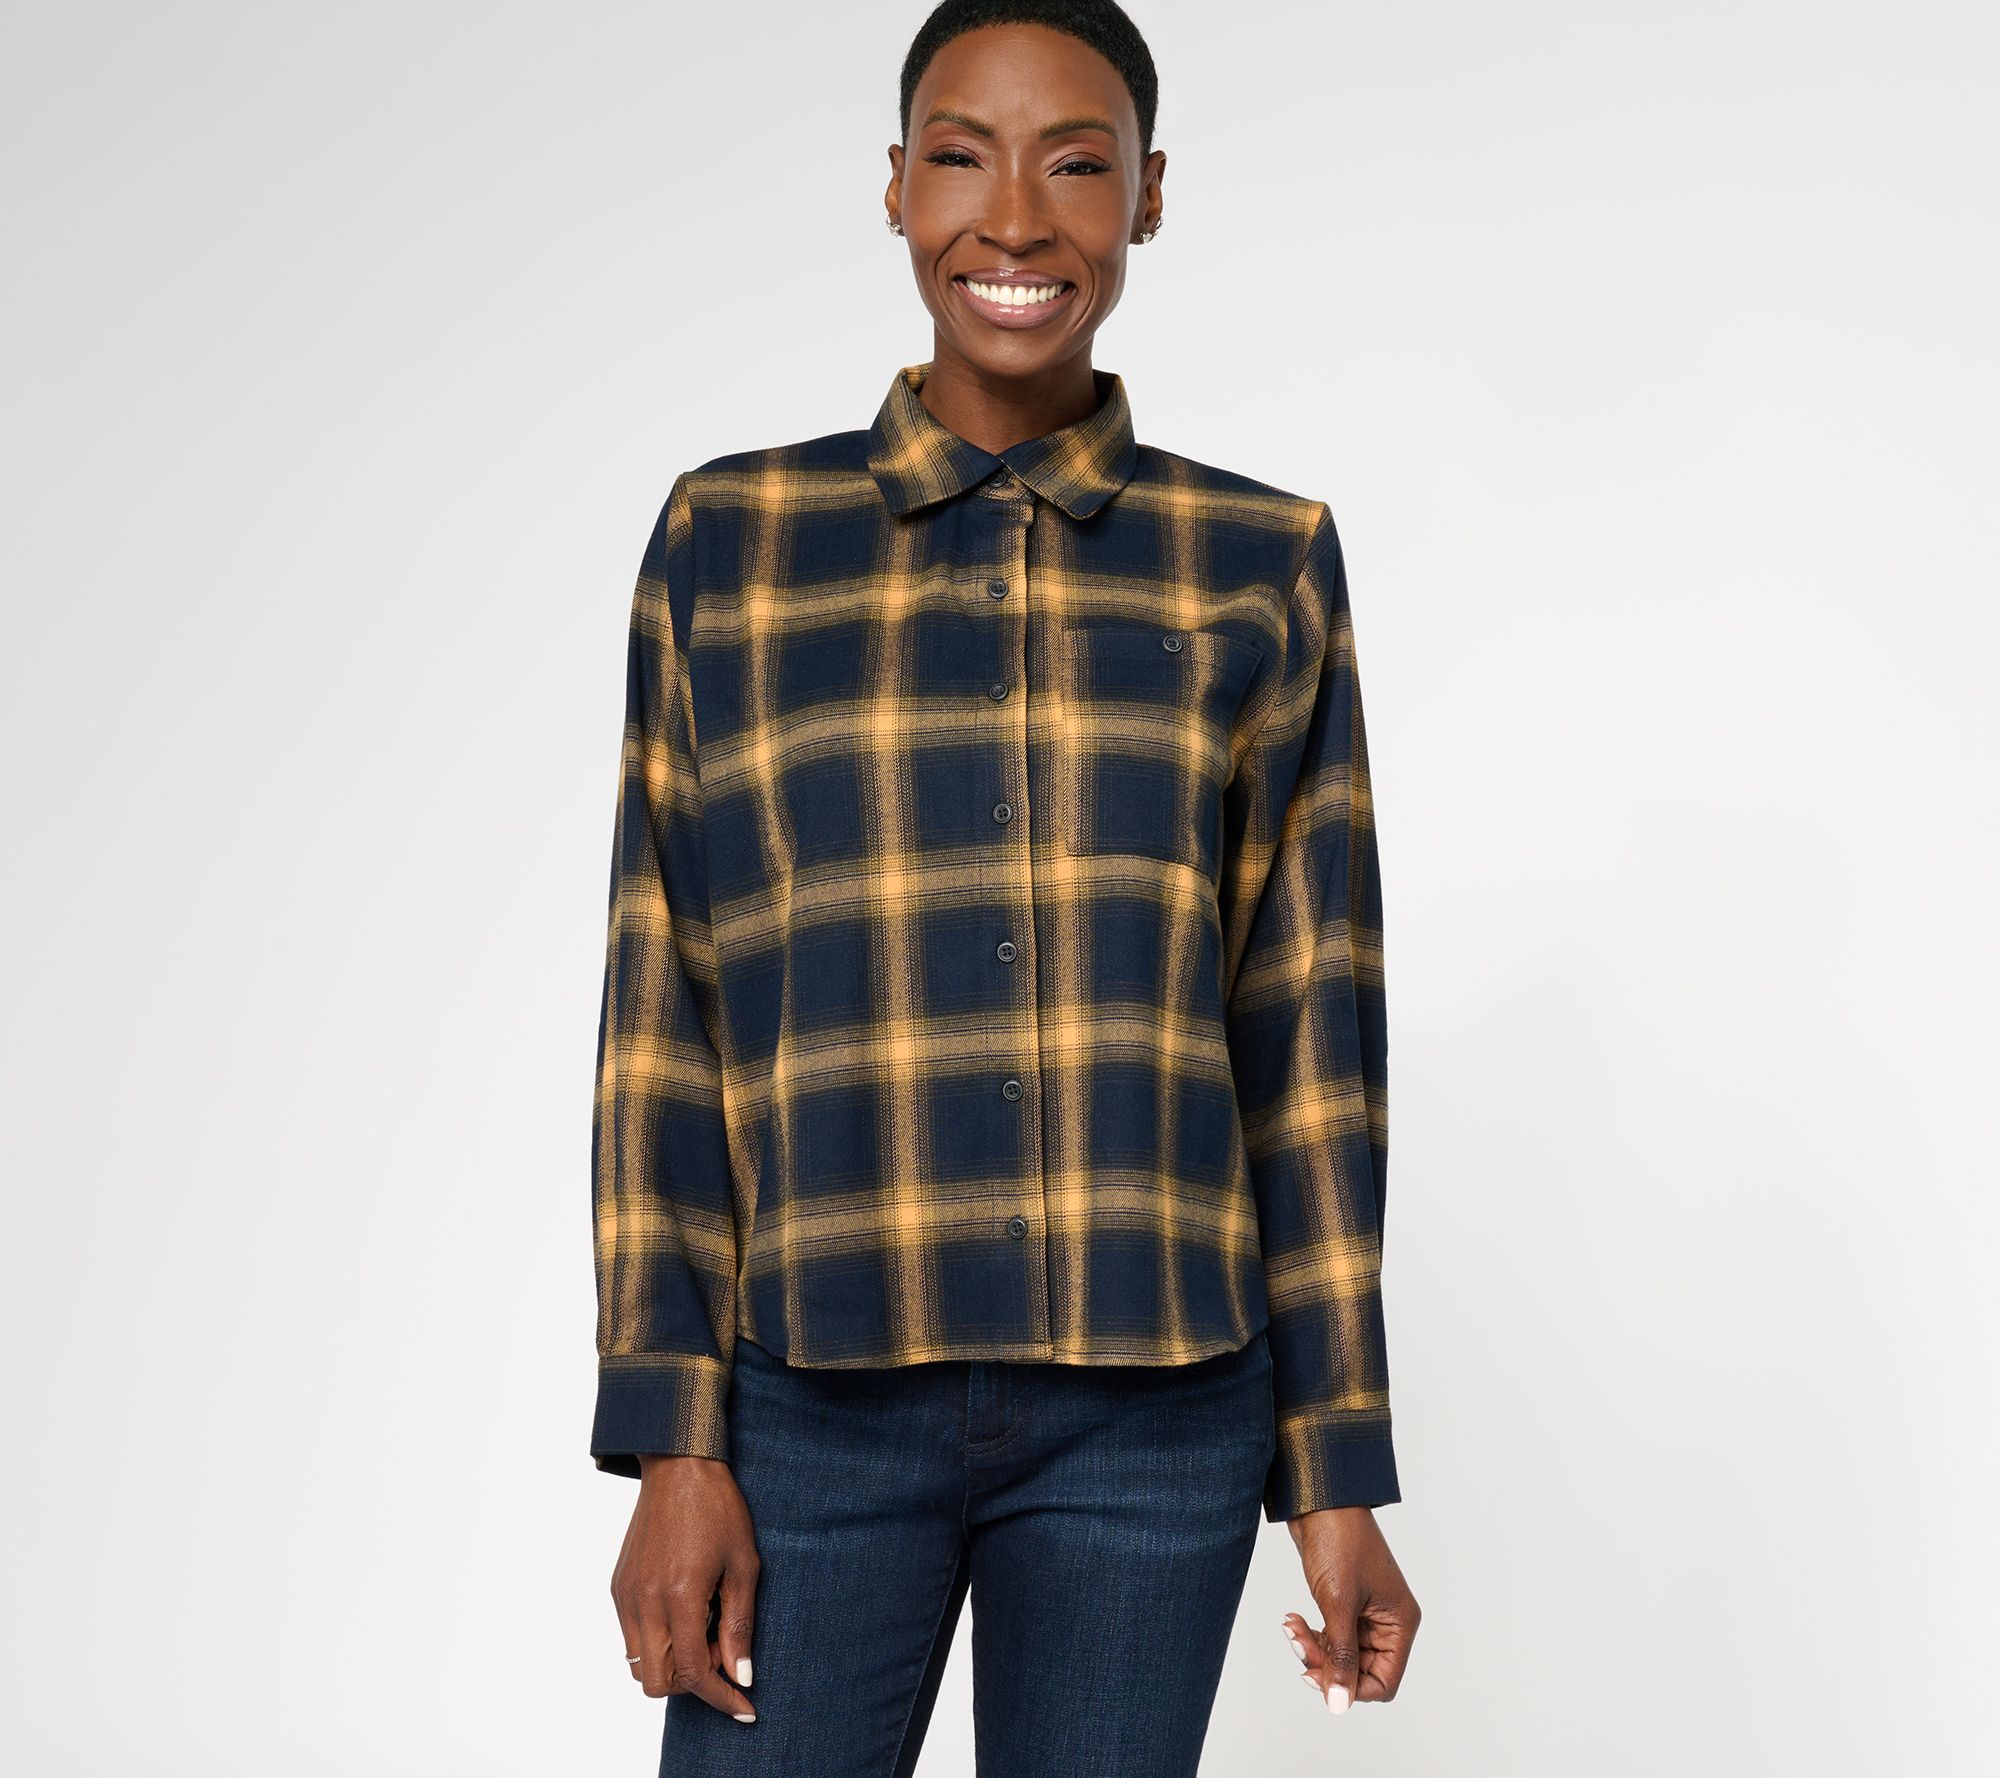 Hot Topic - What to pair with yellow plaid pants you ask? Here's